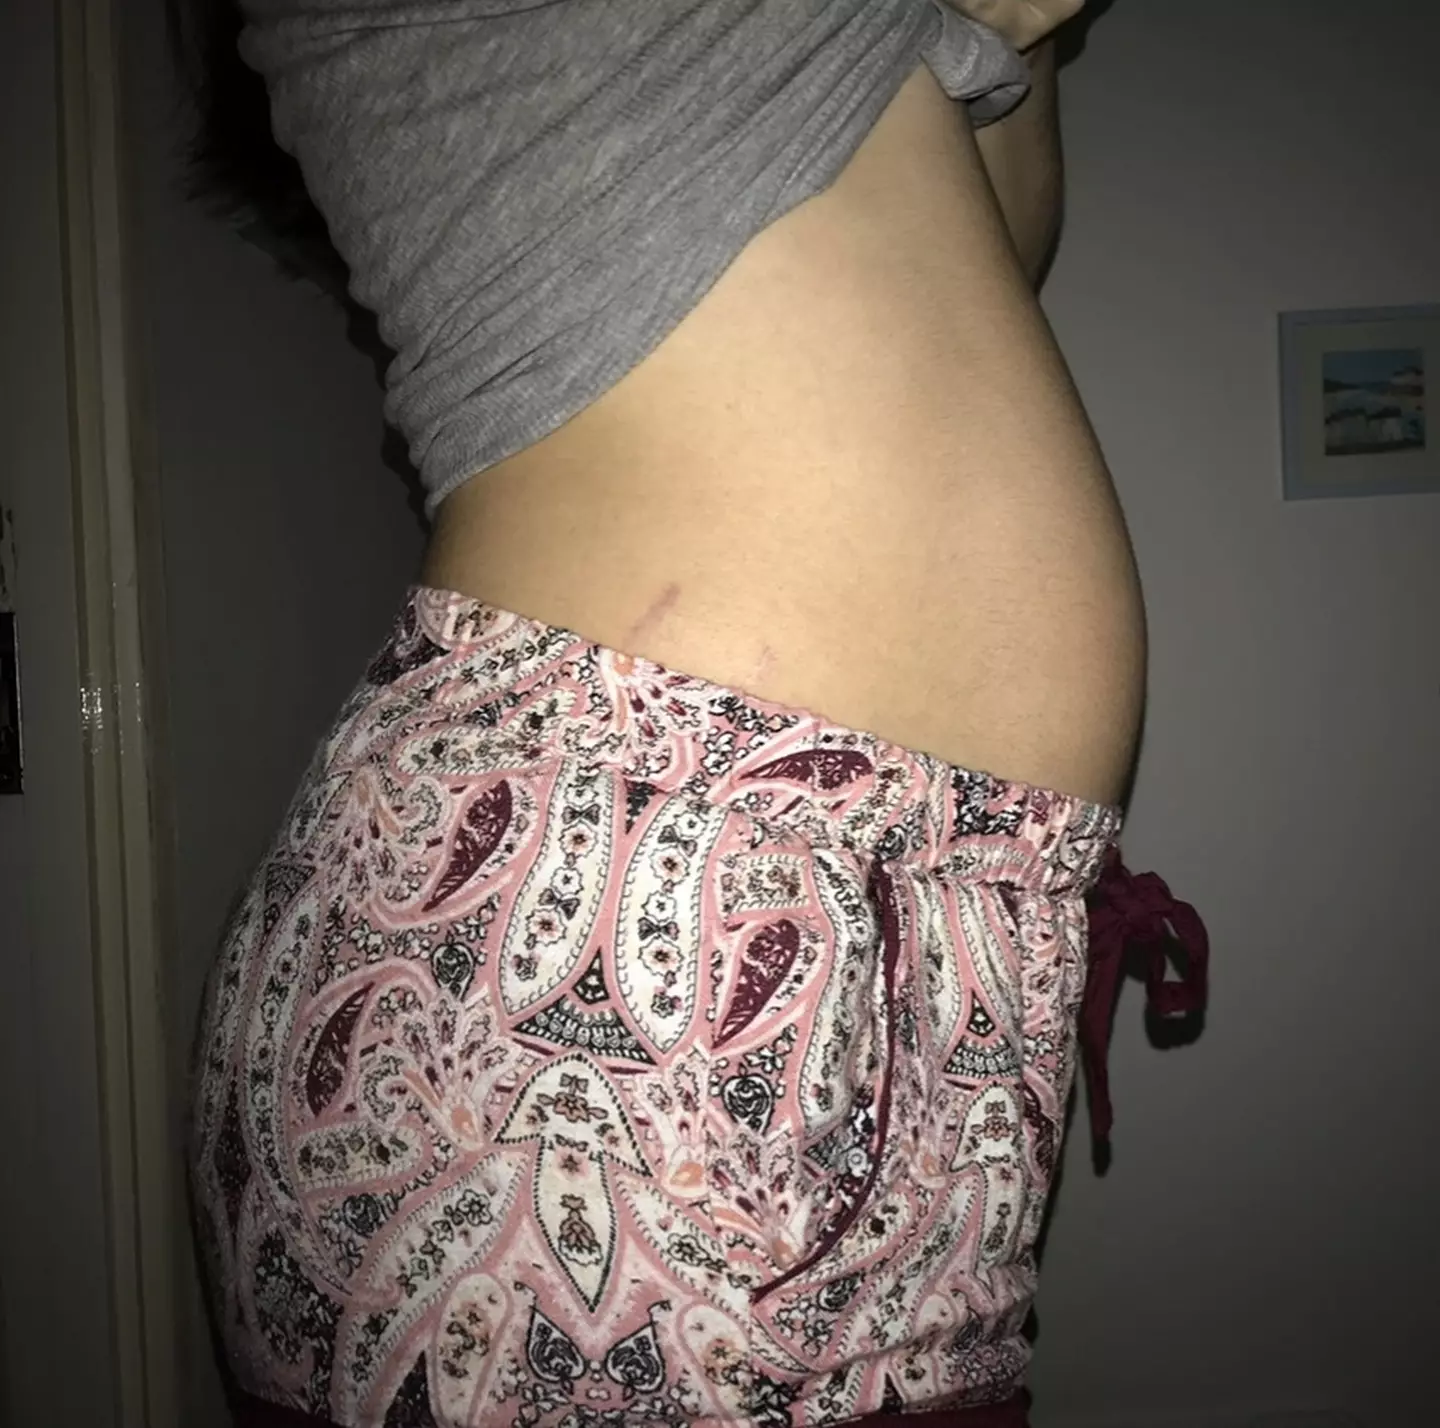 Ellie had abdominal pains but otherwise no pregnancy symptoms (